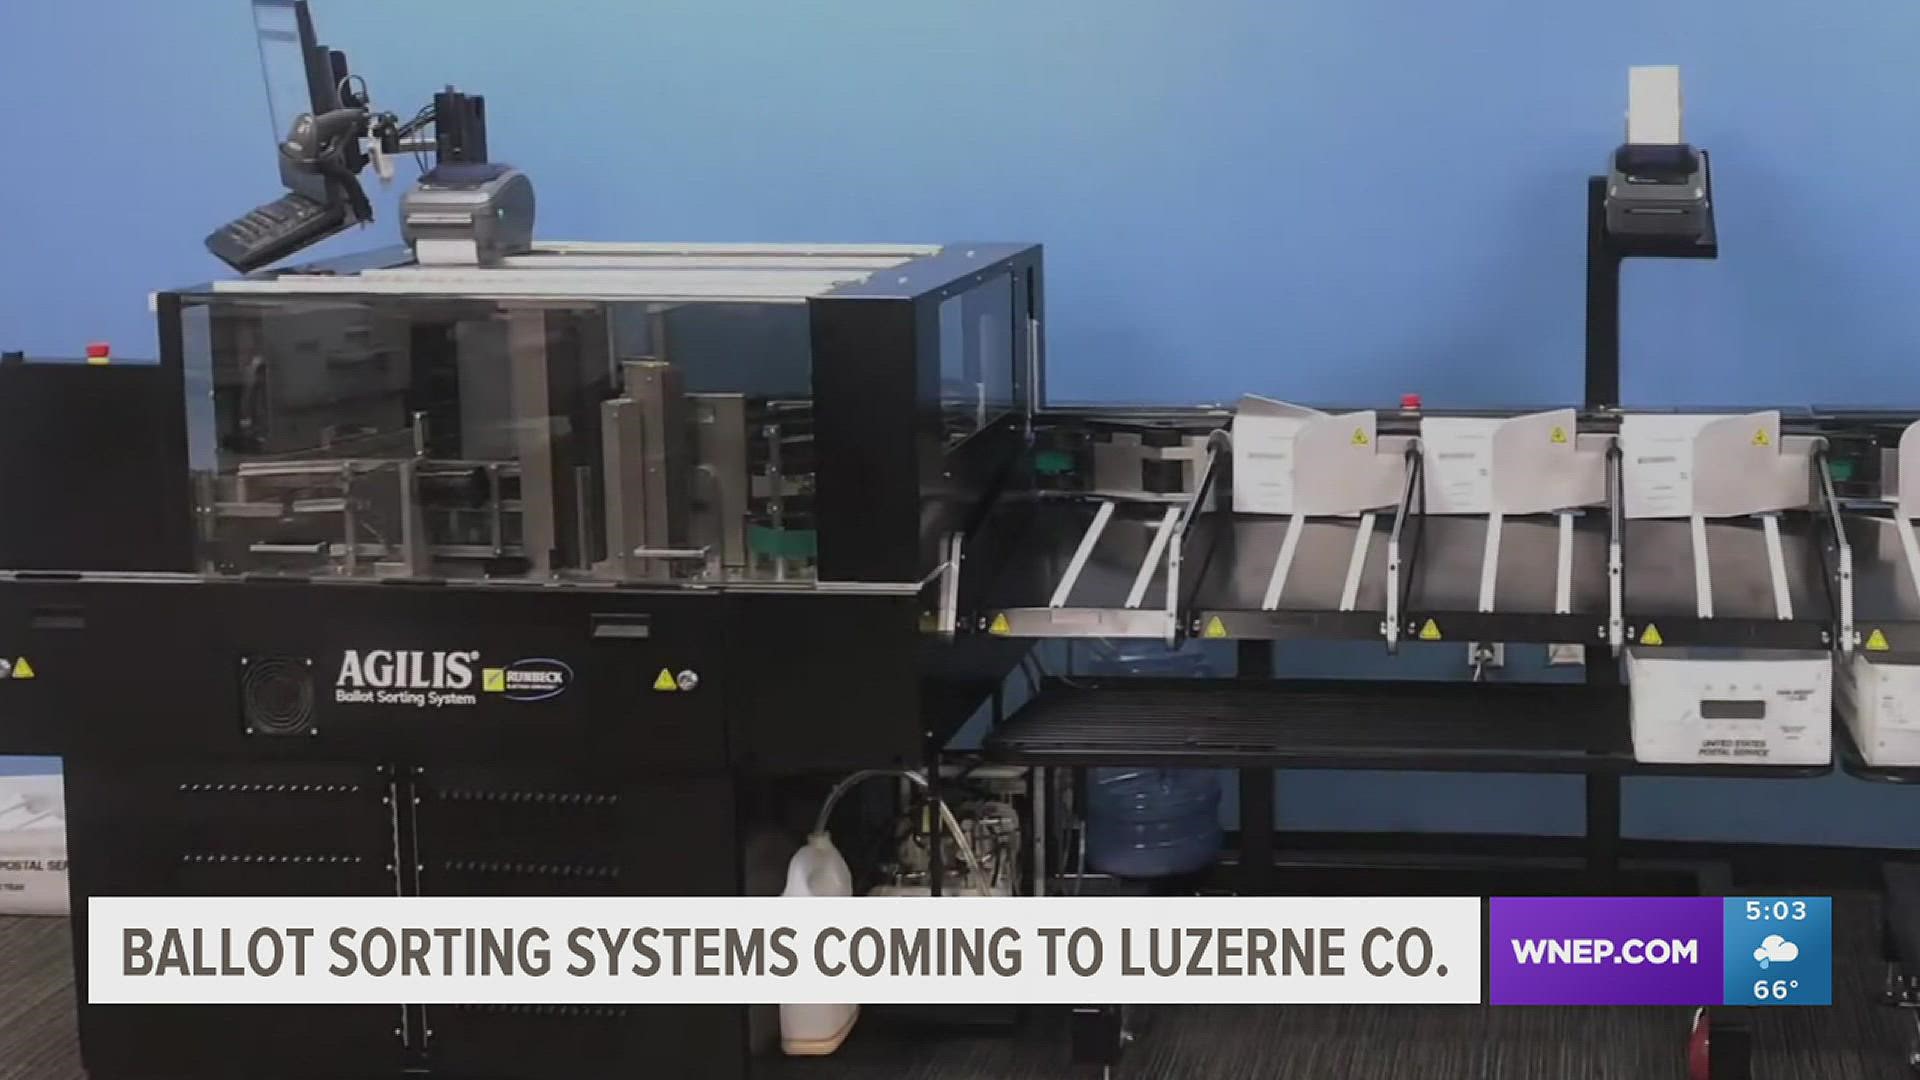 Luzerne County is spending almost a half-million dollars on a ballot sorting system. The manufacturer's CEO details the machine's features and potential benefits.